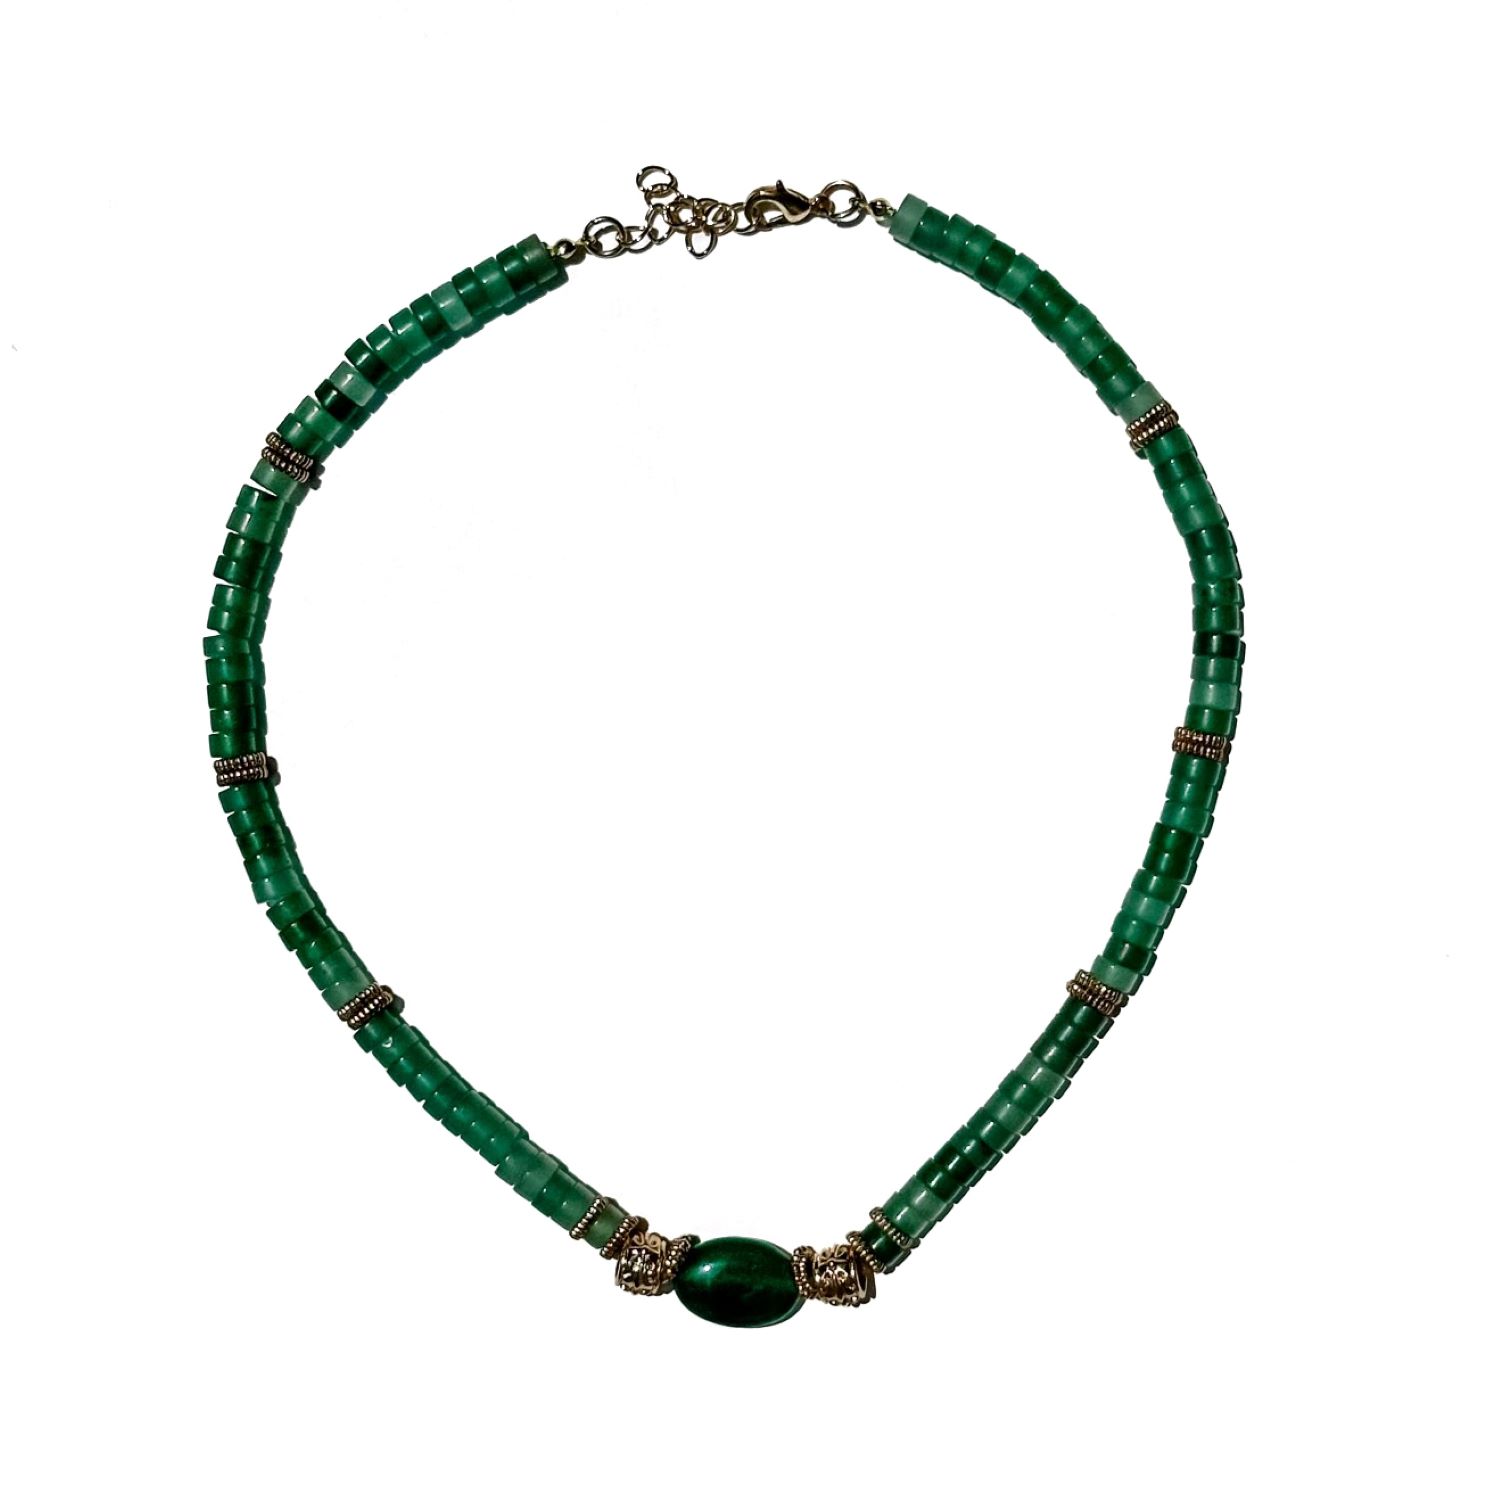 Women’s Green Agate Beaded Necklace Babaloo Jewelry